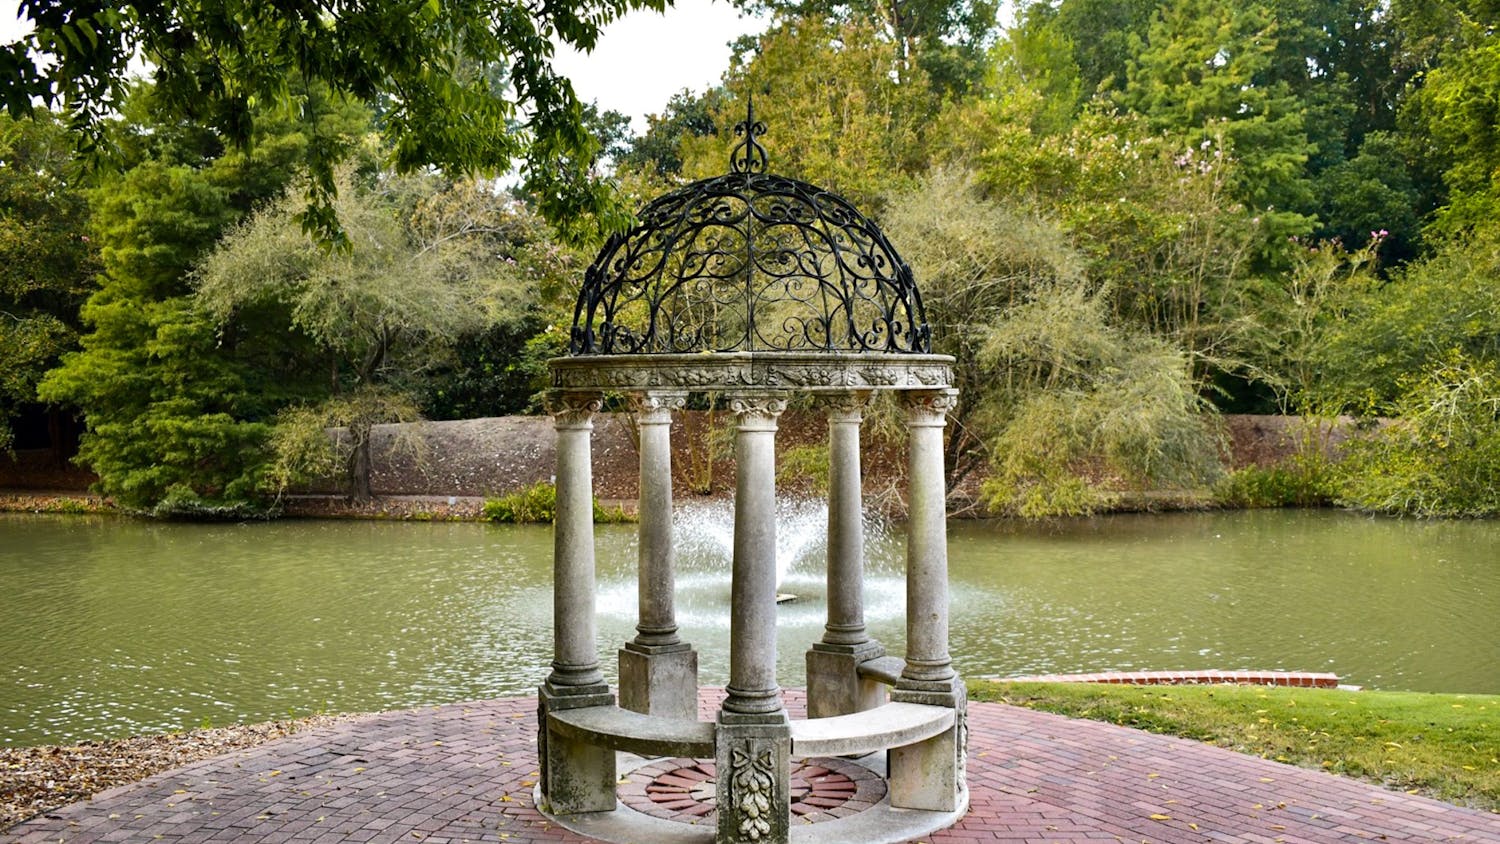 One of the many fountains at Hopelands Gardens. Hopelands Gardens is a sprawling landmark in Aiken with wildlife, ponds, gazebos, a performing arts stage and a "turtle island" that aims to preserve the natural landscape.&nbsp;